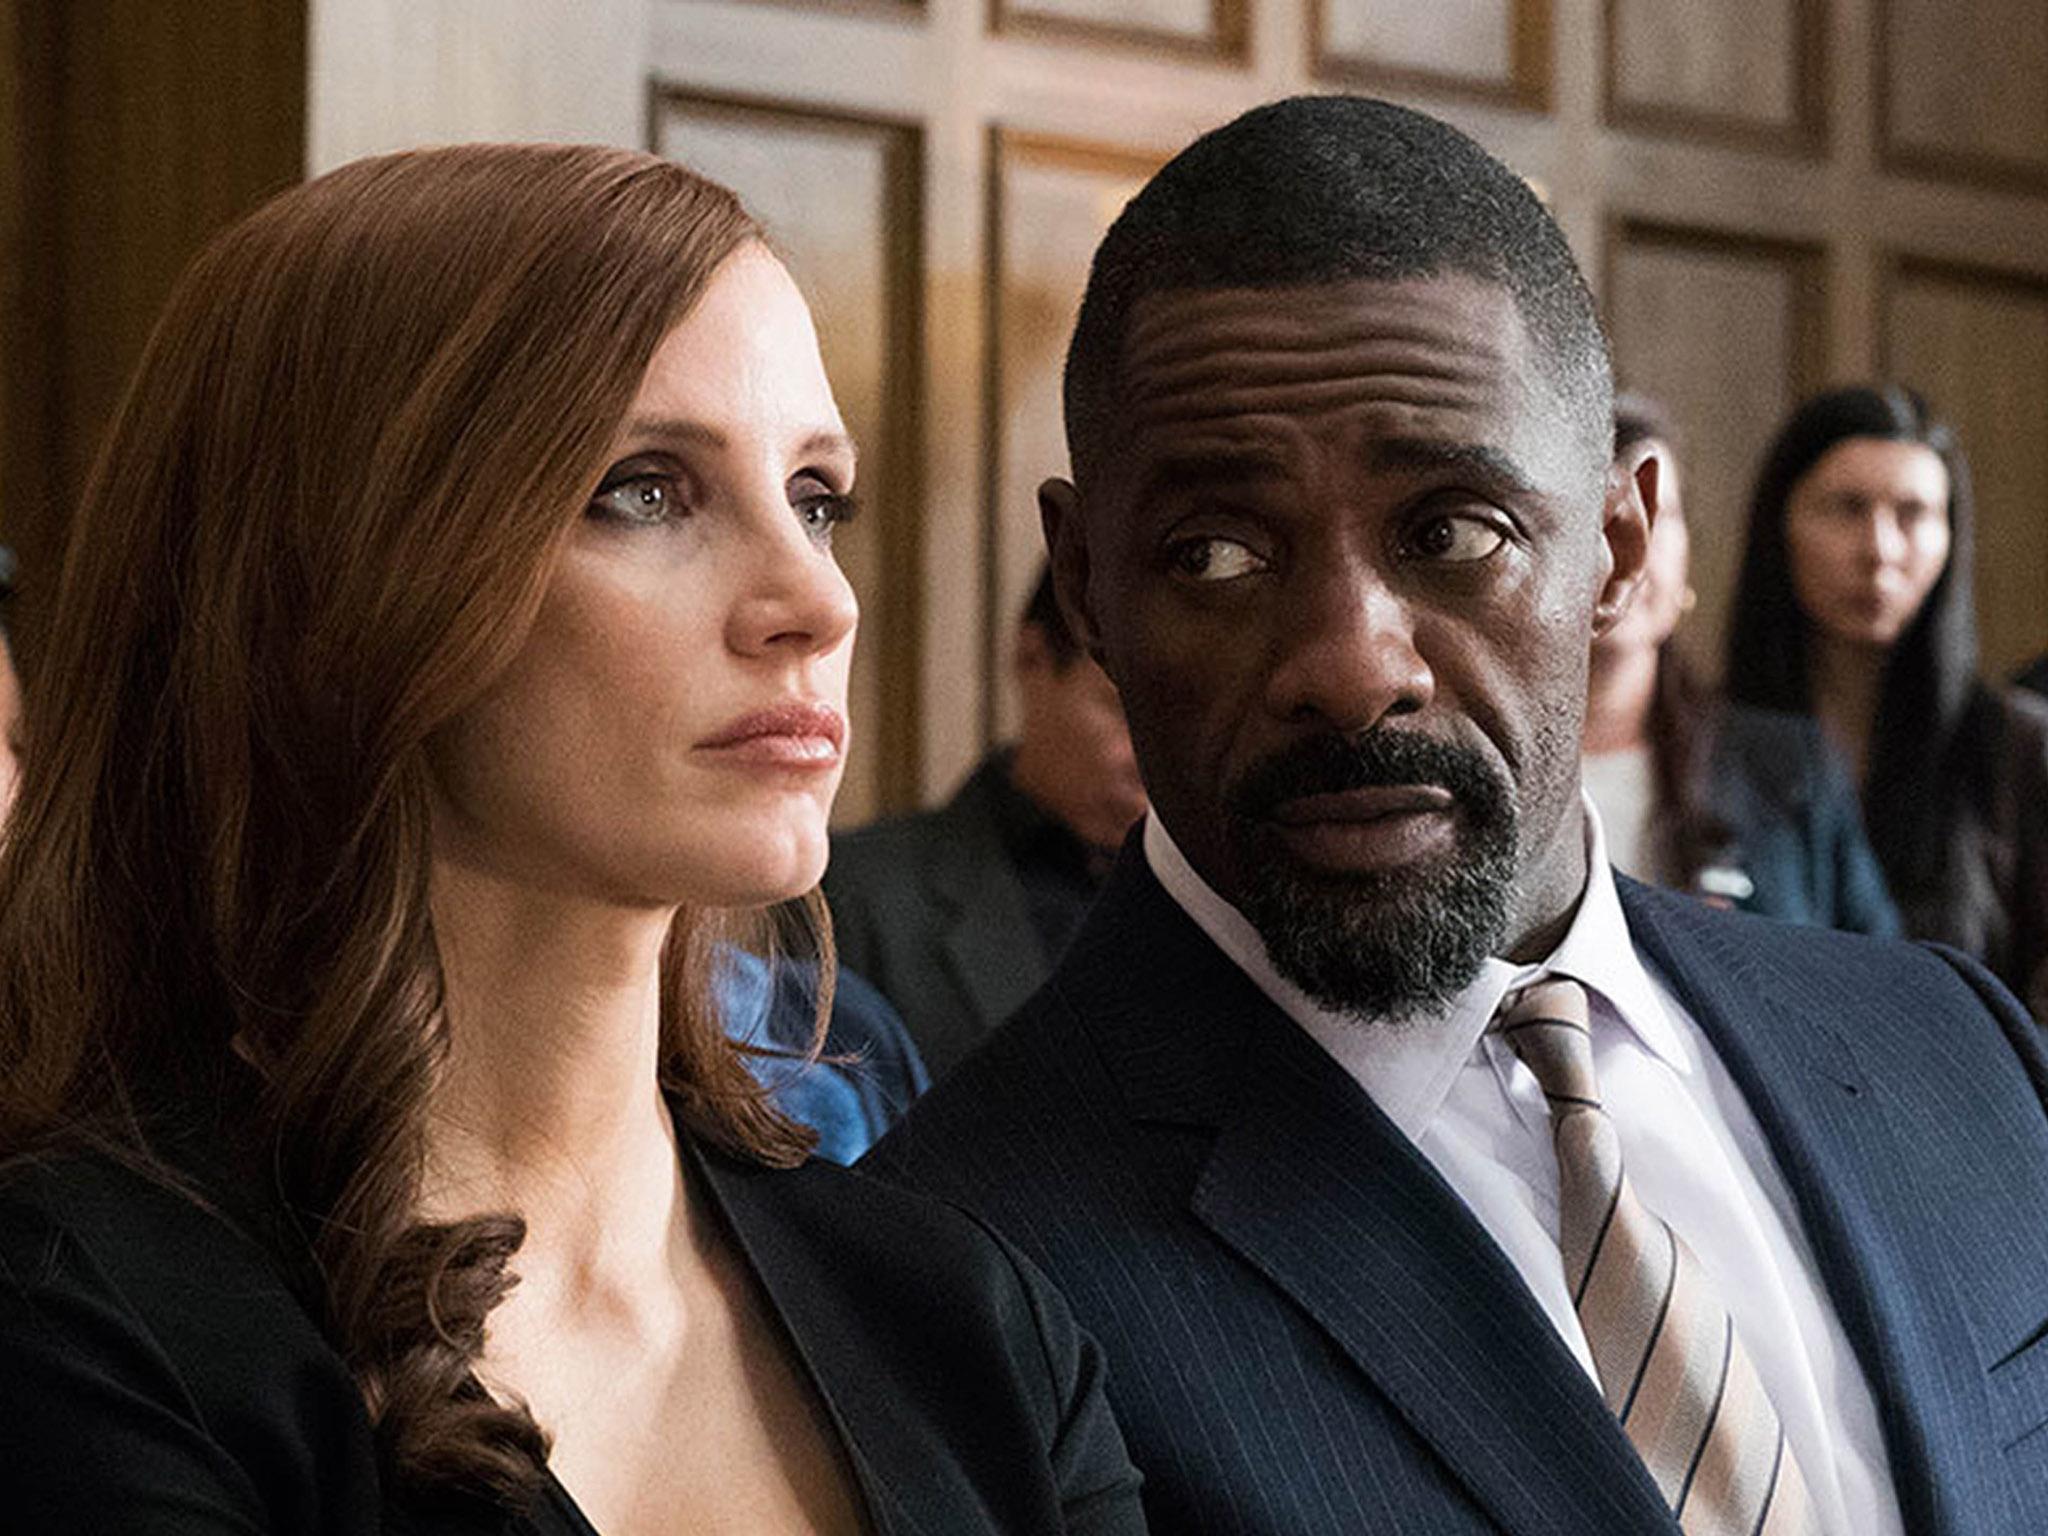 Jessica Chastain and Idris Elba star in Sorkin's blistering directorial debut